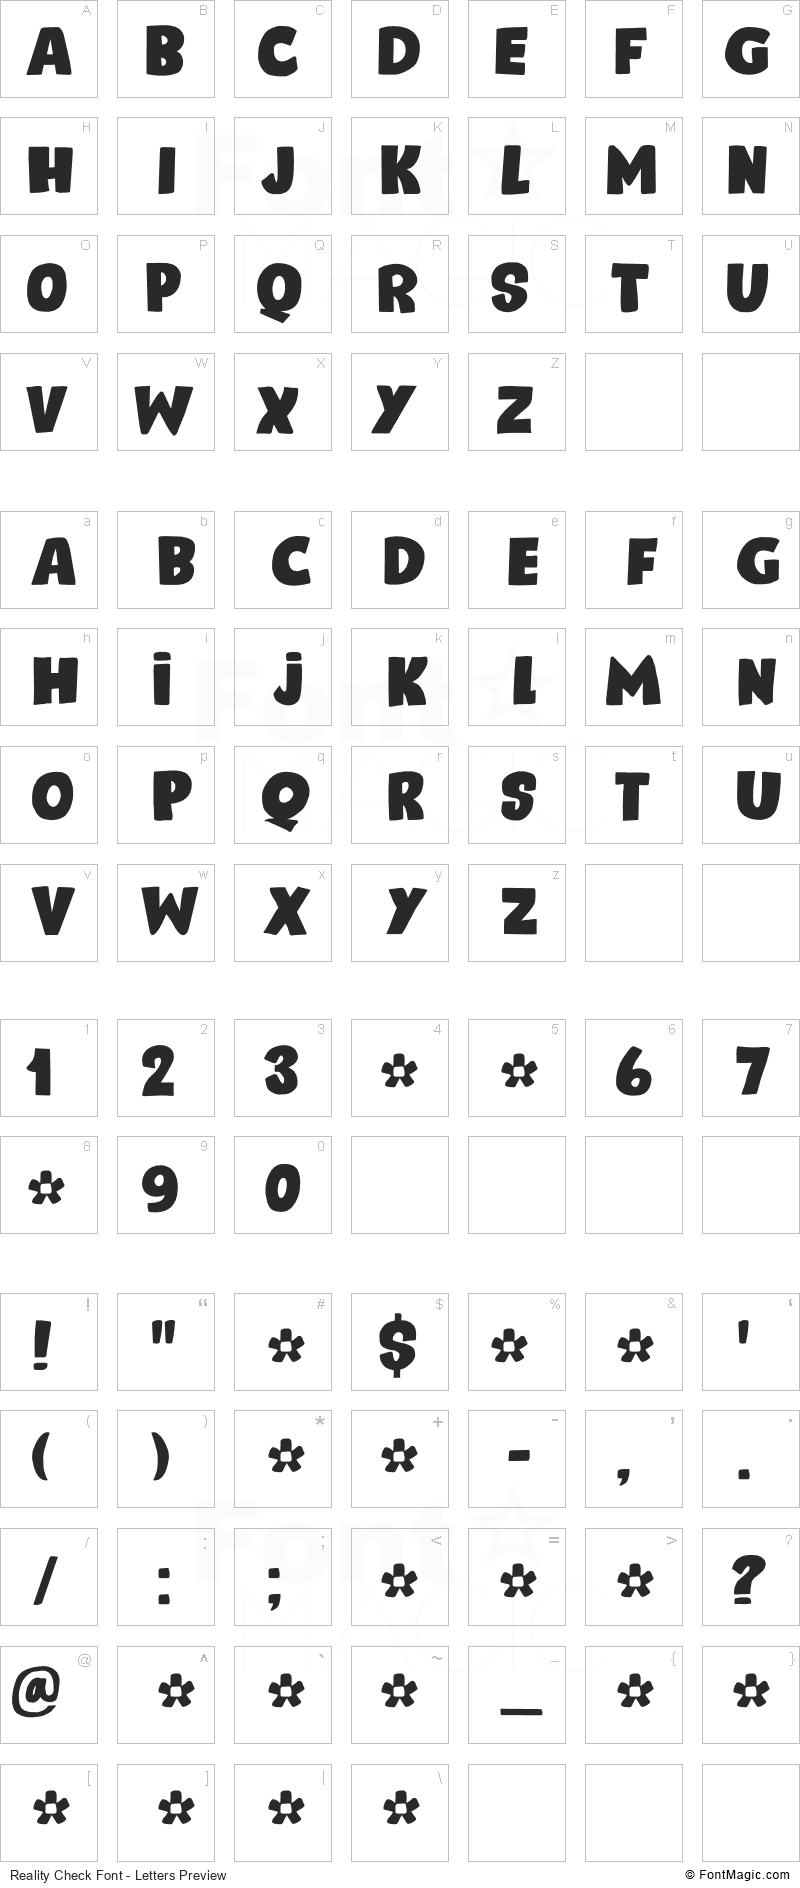 Reality Check Font - All Latters Preview Chart